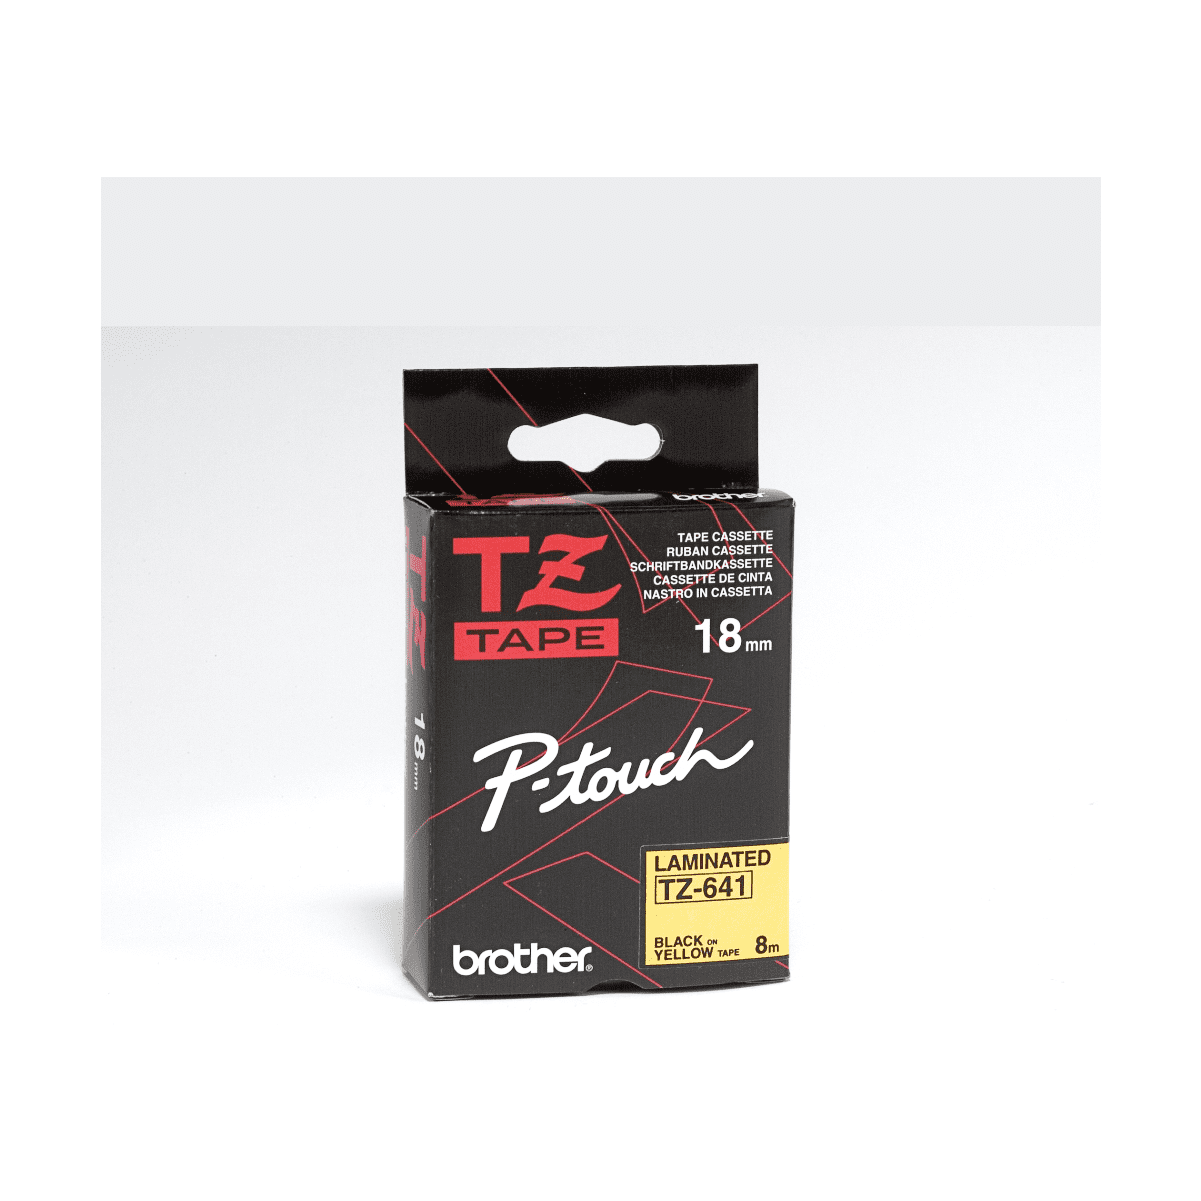 Brother Genuine TZe641 Black on Yellow Laminated Tape for P-touch Label Makers, 18 mm wide x 8 m long